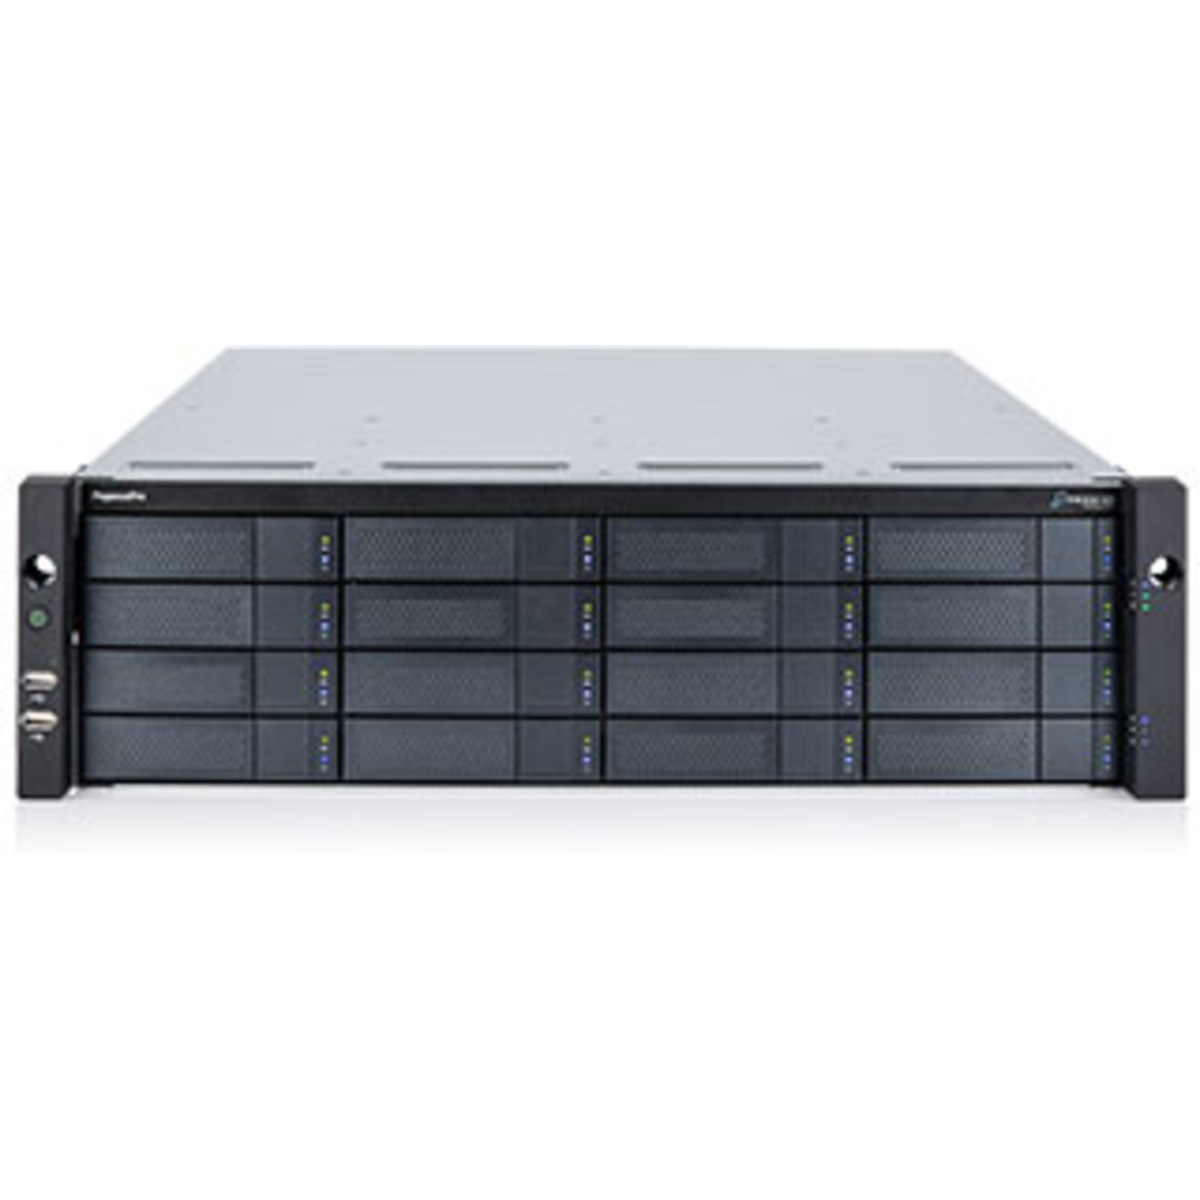 Promise Technology PegasusPro R16 66tb 16-Bay RackMount Multimedia / Power User / Business DAS-NAS - Combo Direct + Network Storage Device 11x6tb Western Digital Red Plus WD60EFPX 3.5 5640rpm SATA 6Gb/s HDD NAS Class Drives Installed - Burn-In Tested PegasusPro R16